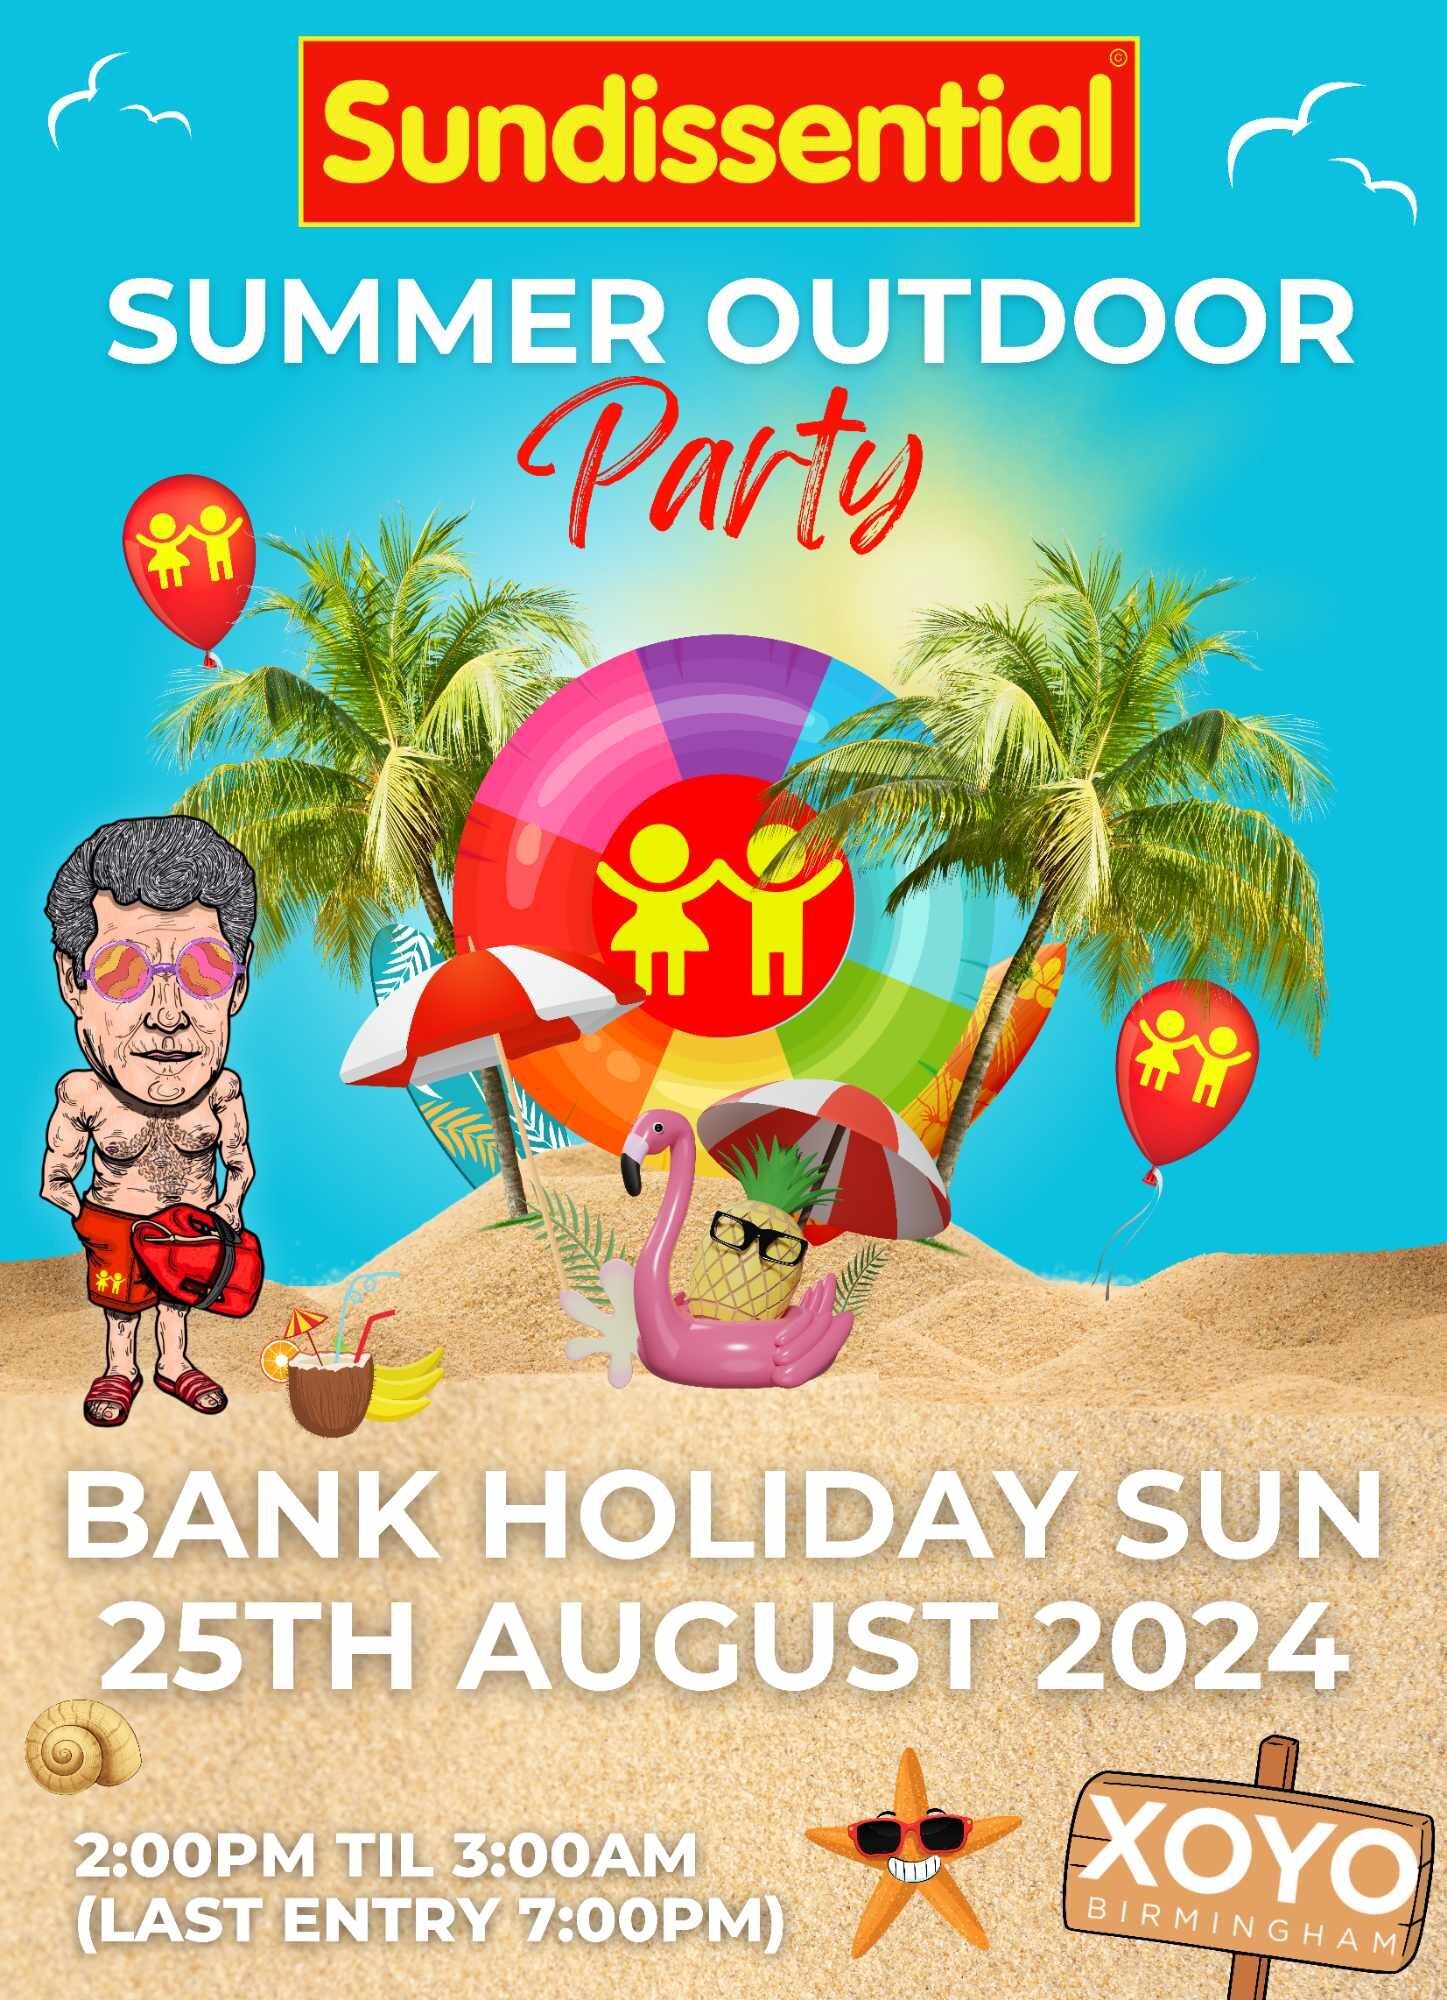 Sundissential Summer Outdoor Party (Bank Holiday Sunday 25th August)